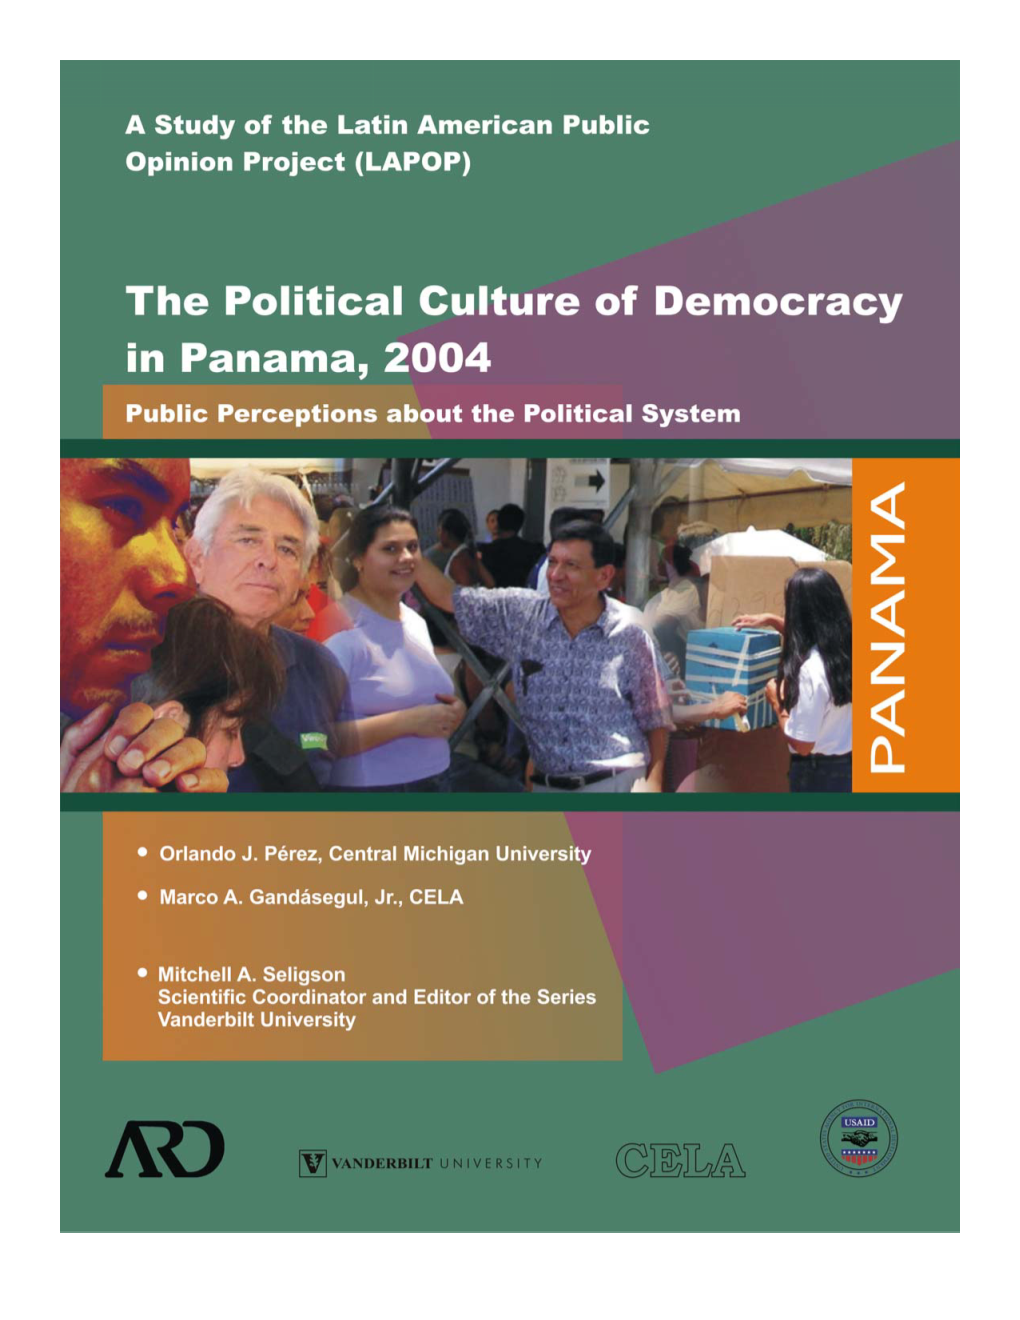 The Political Culture of Democracy in Panama, 2004 Public Perceptions About the Political System